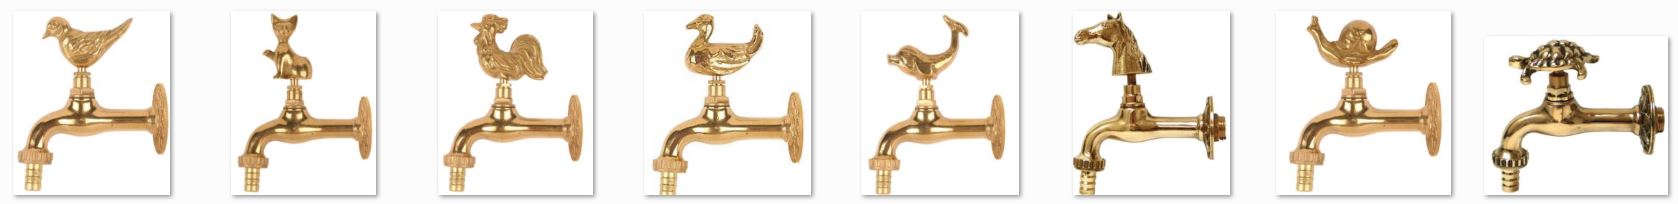 Brass Taps with Animal Knobs